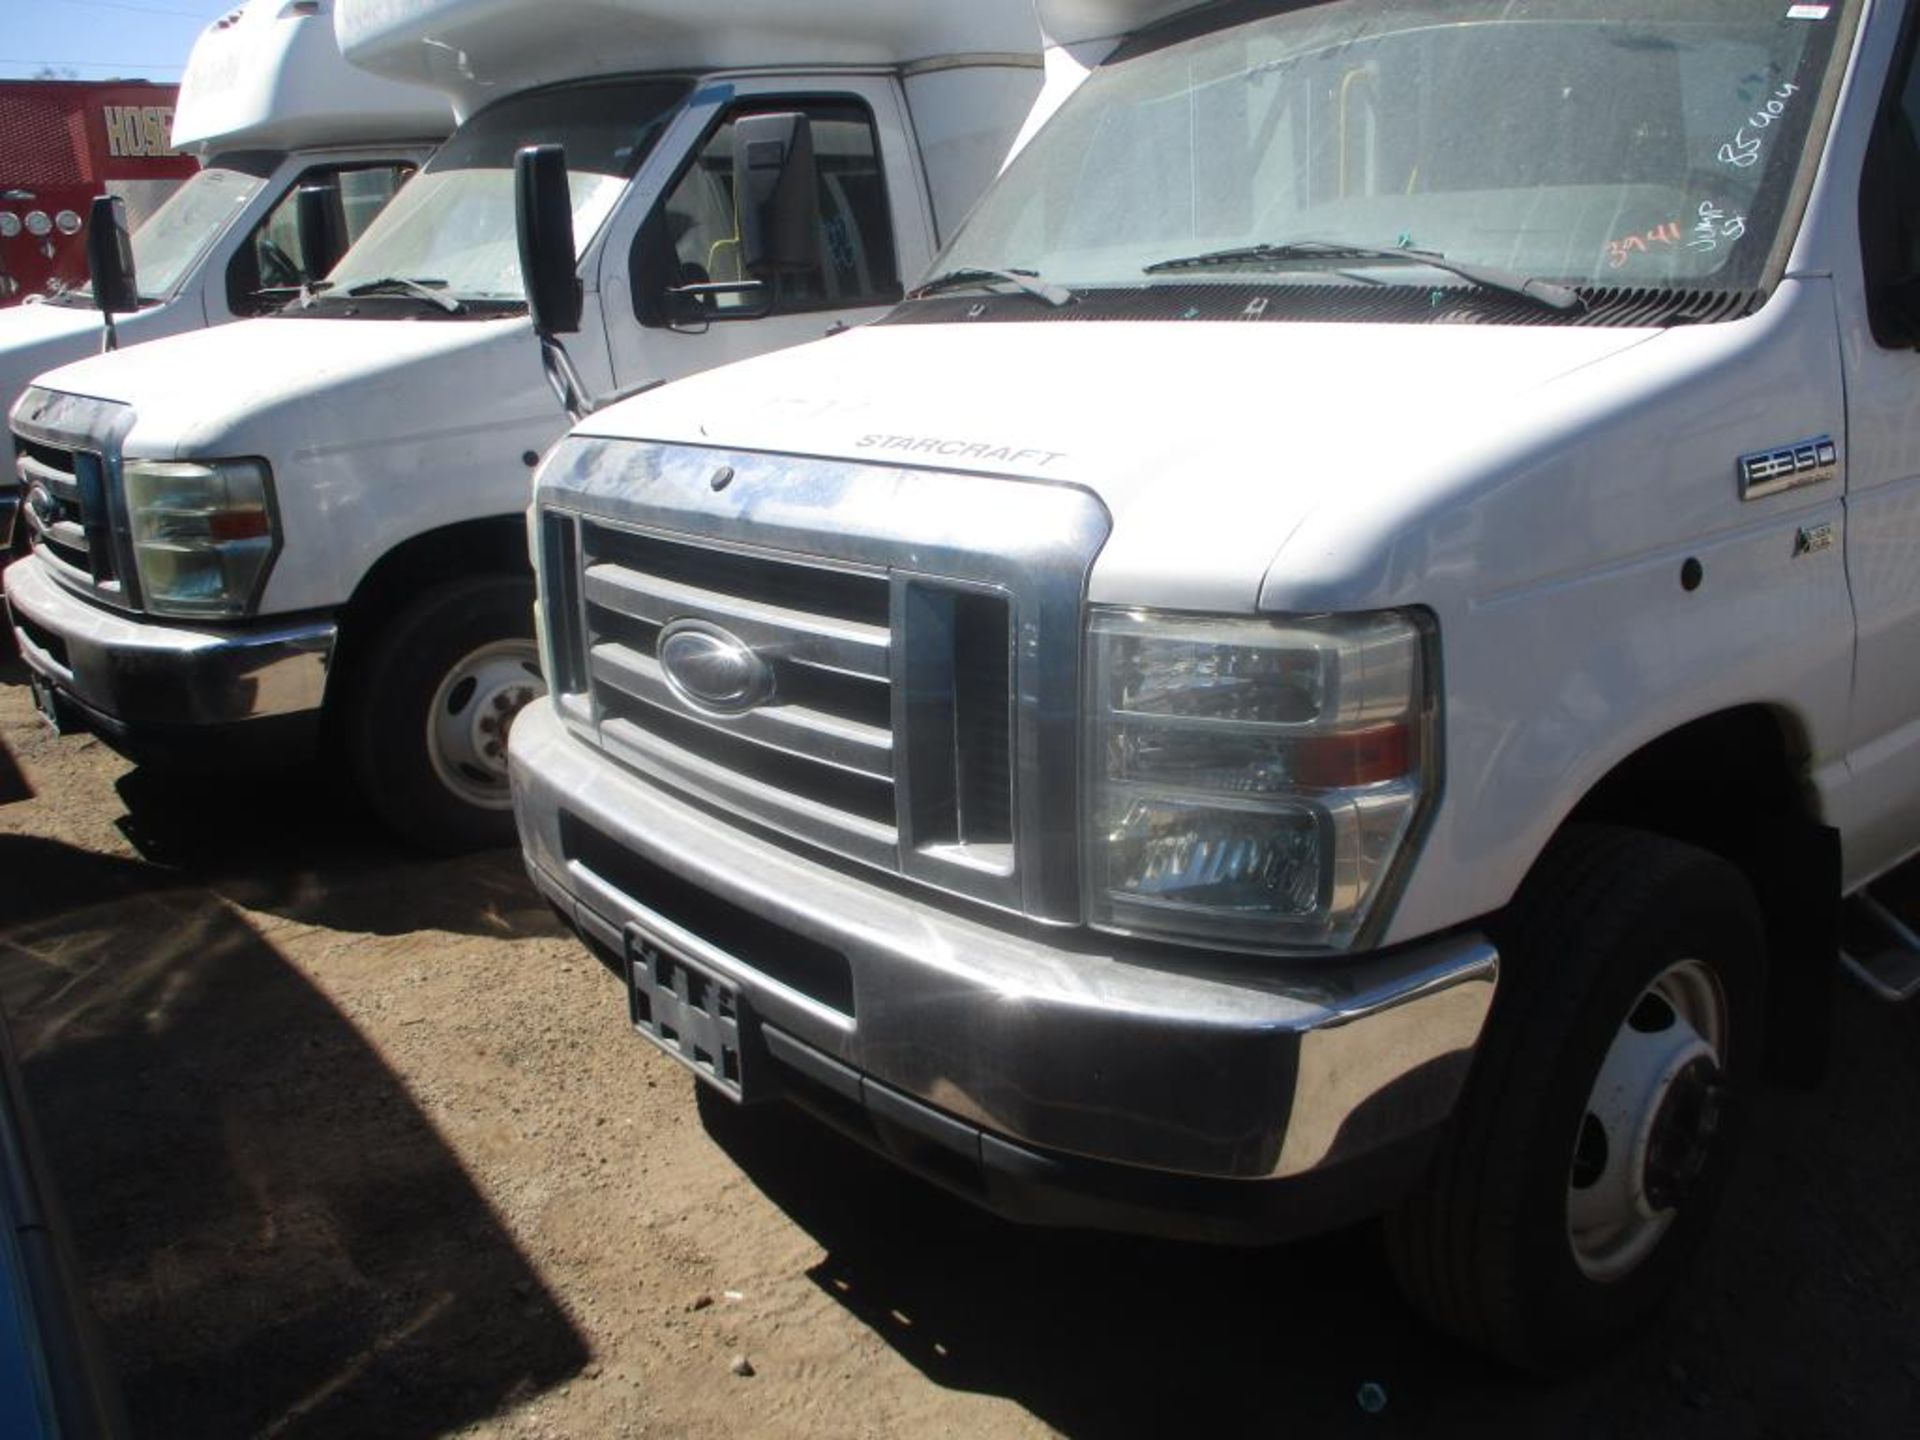 (Lot # 3941) - 2013 Ford E-Series Shuttle Bus - Image 2 of 13